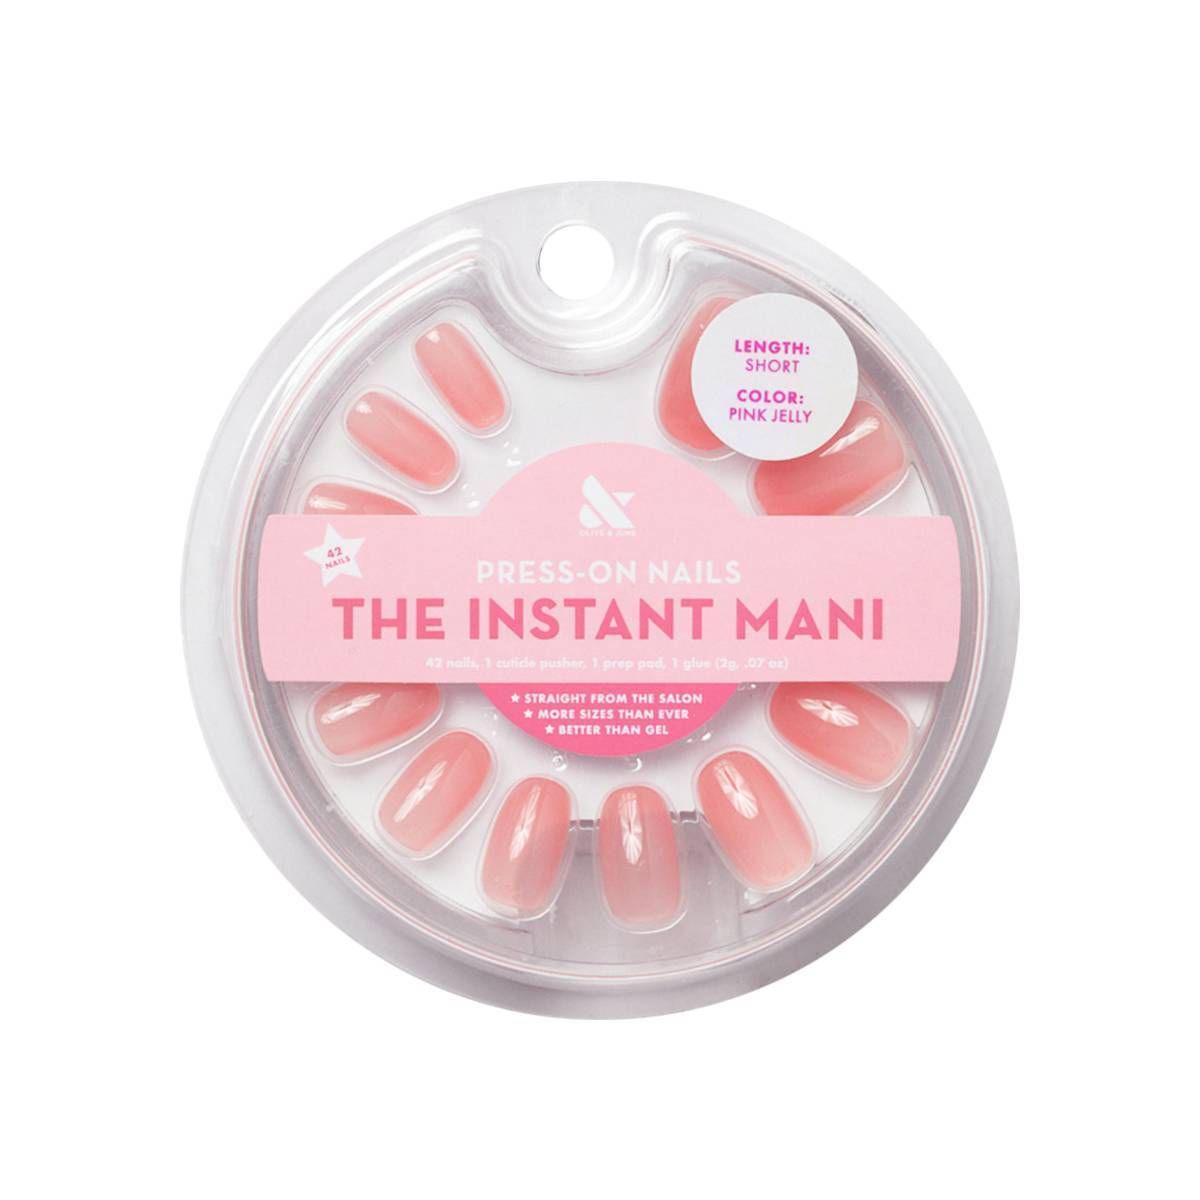 Olive & June Round Press-On Fake Nails - Pink Jelly - 42ct | Target